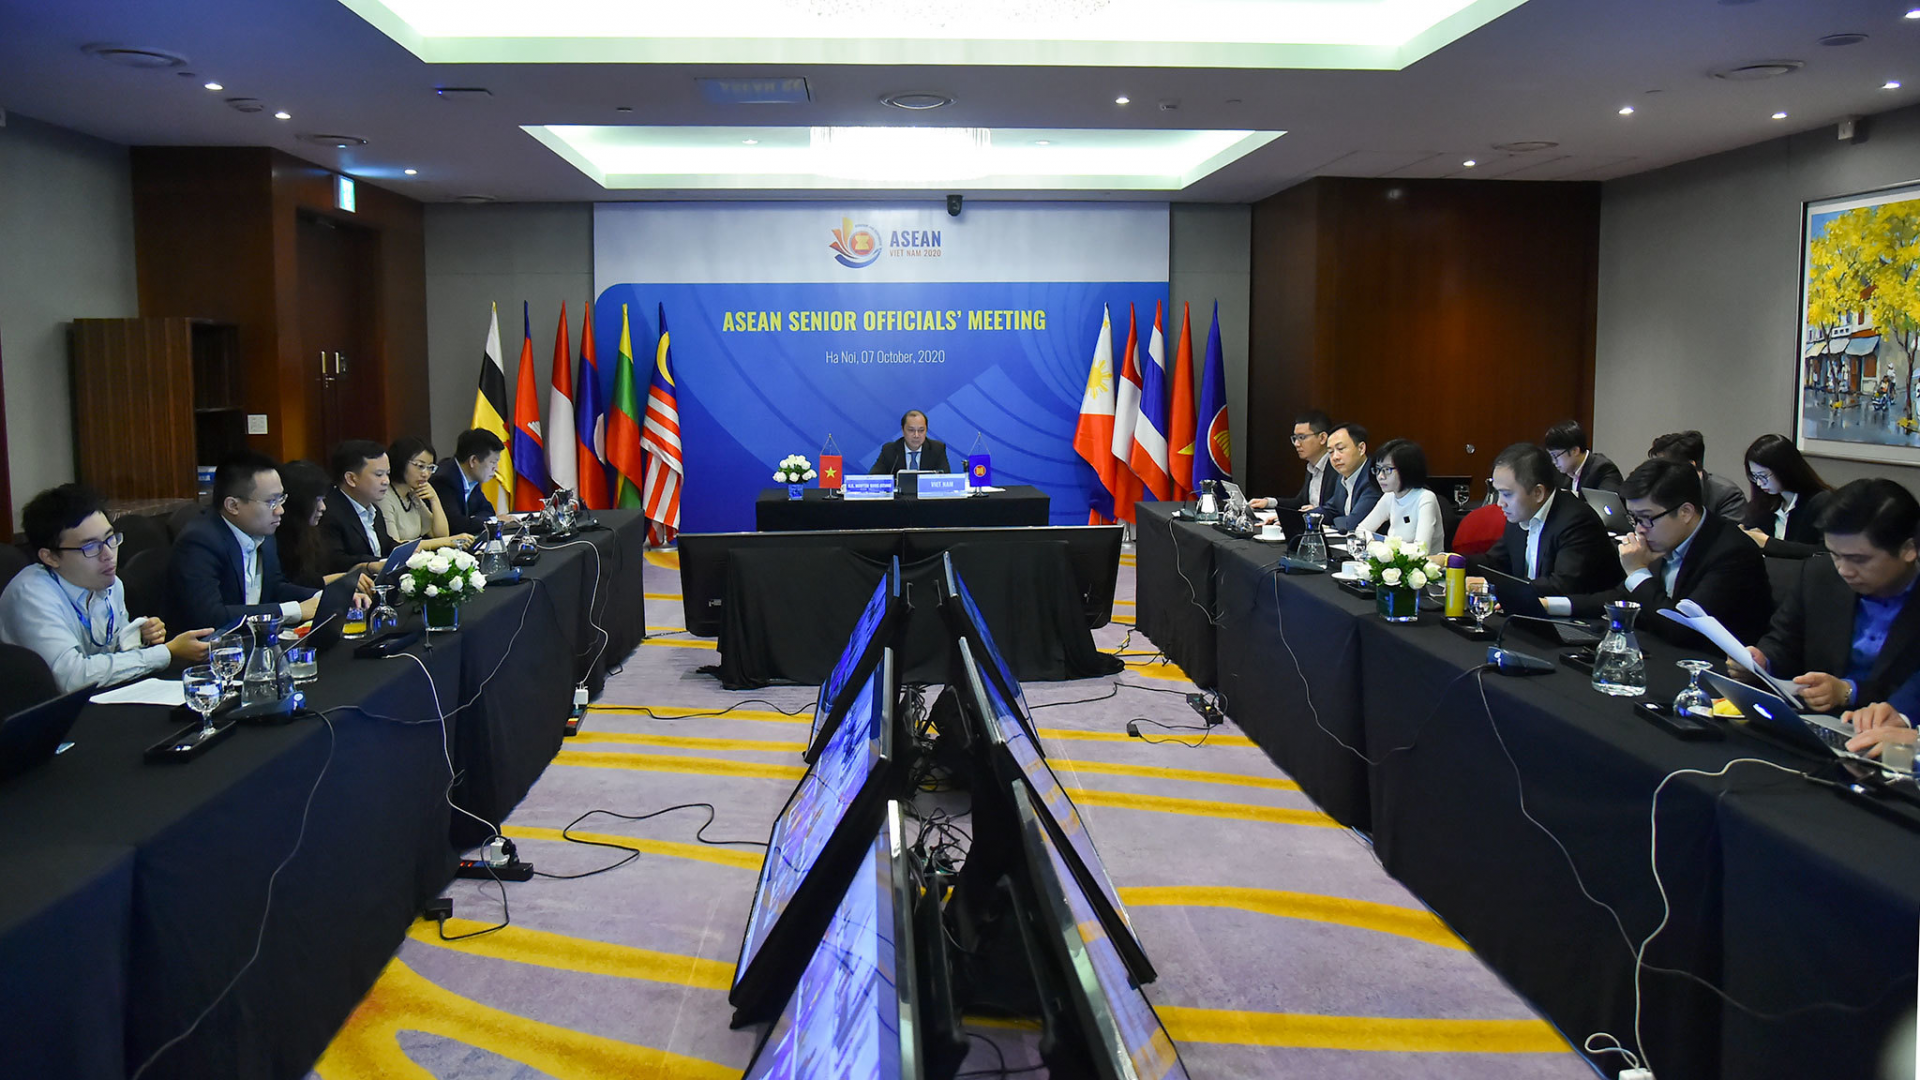 asean pledges to coordinate with china soon complete talks for code of conduct in south sea bien dong sea